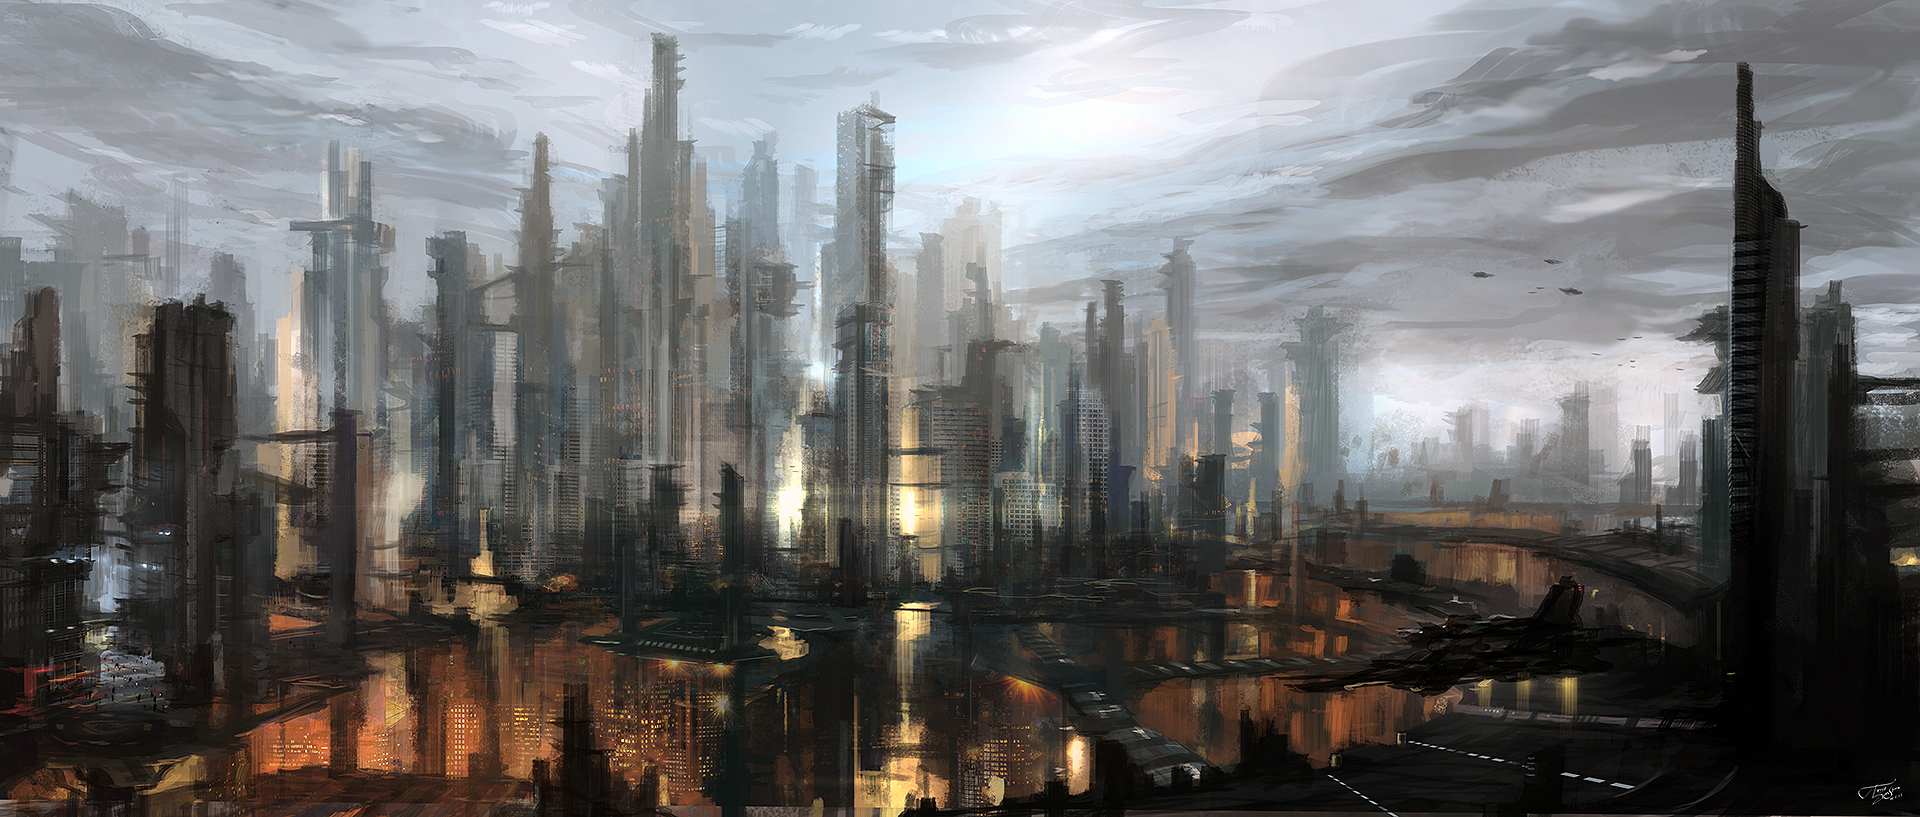 cityscape by tnounsy on Clipart library